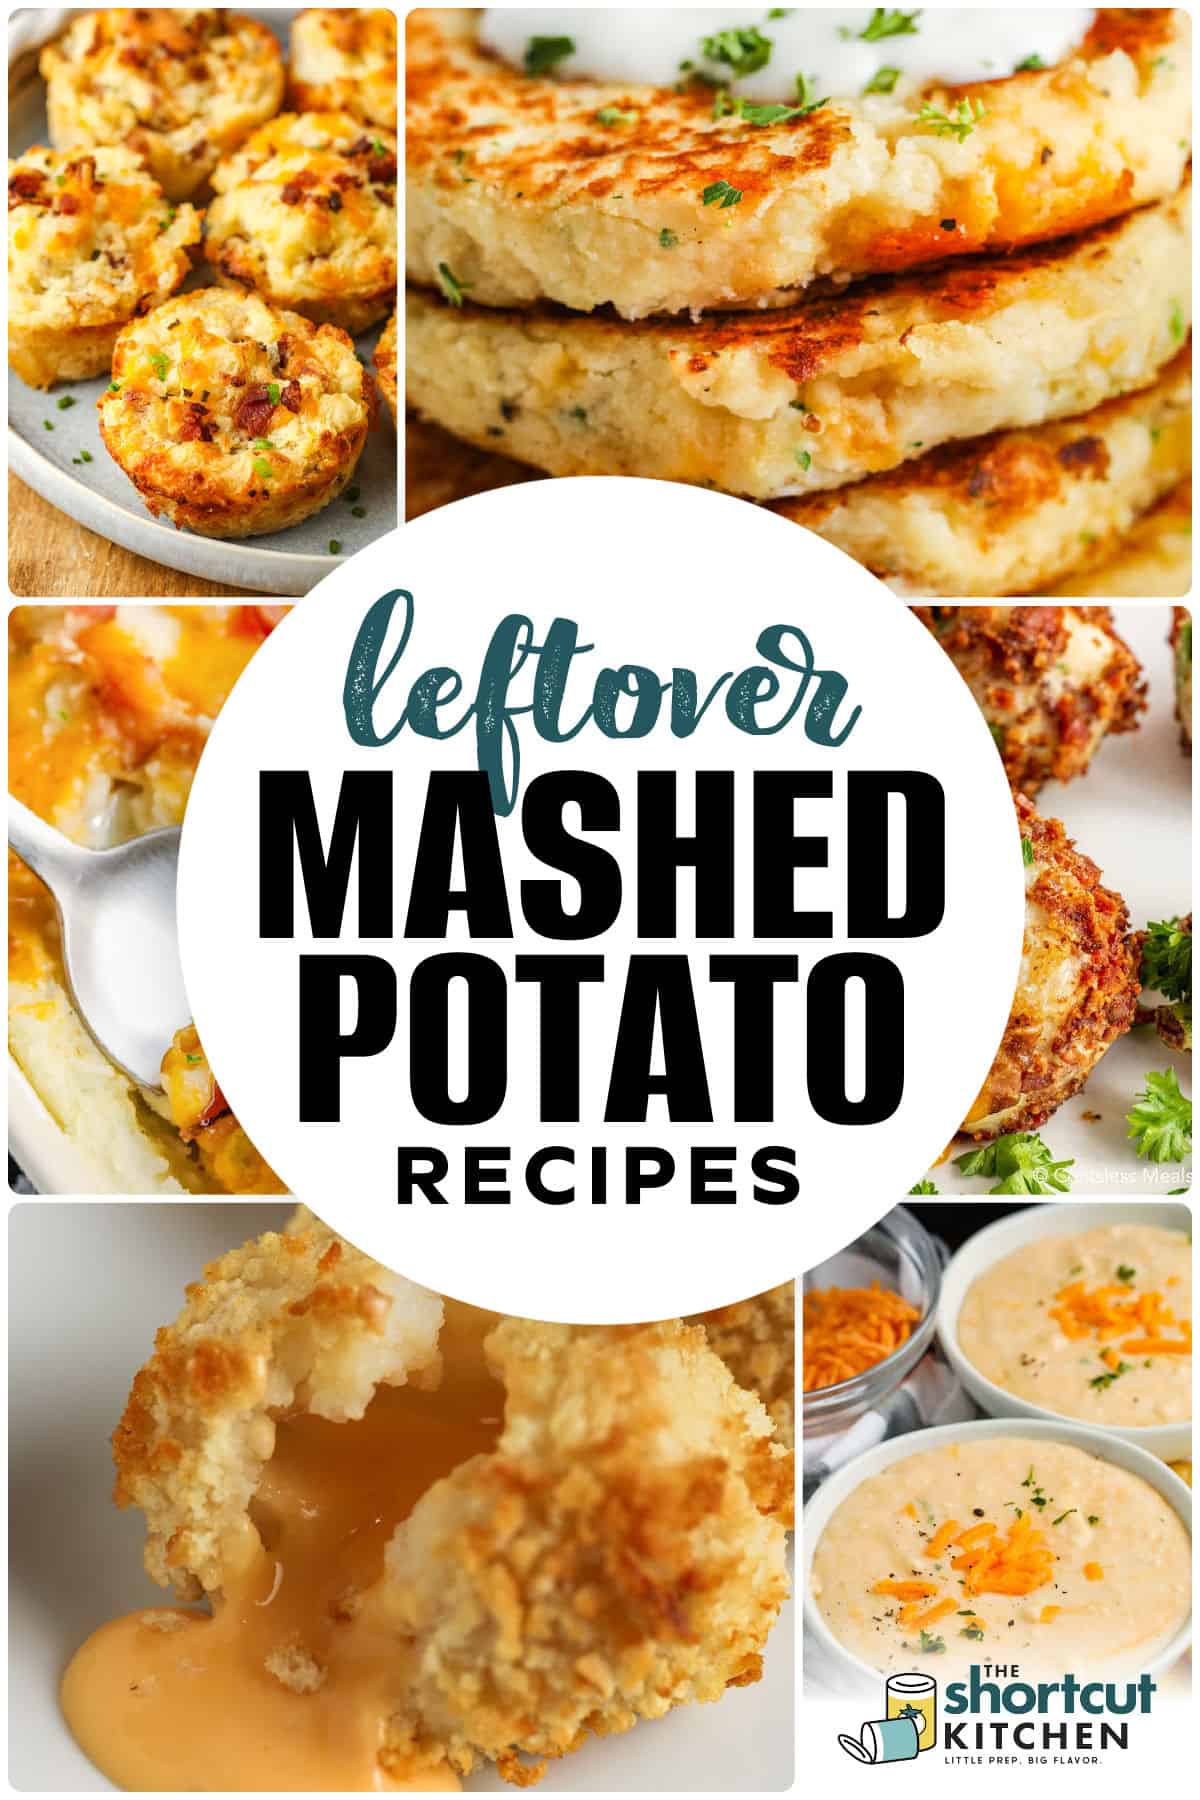 photos of Leftover Mashed Potato Recipes with a title